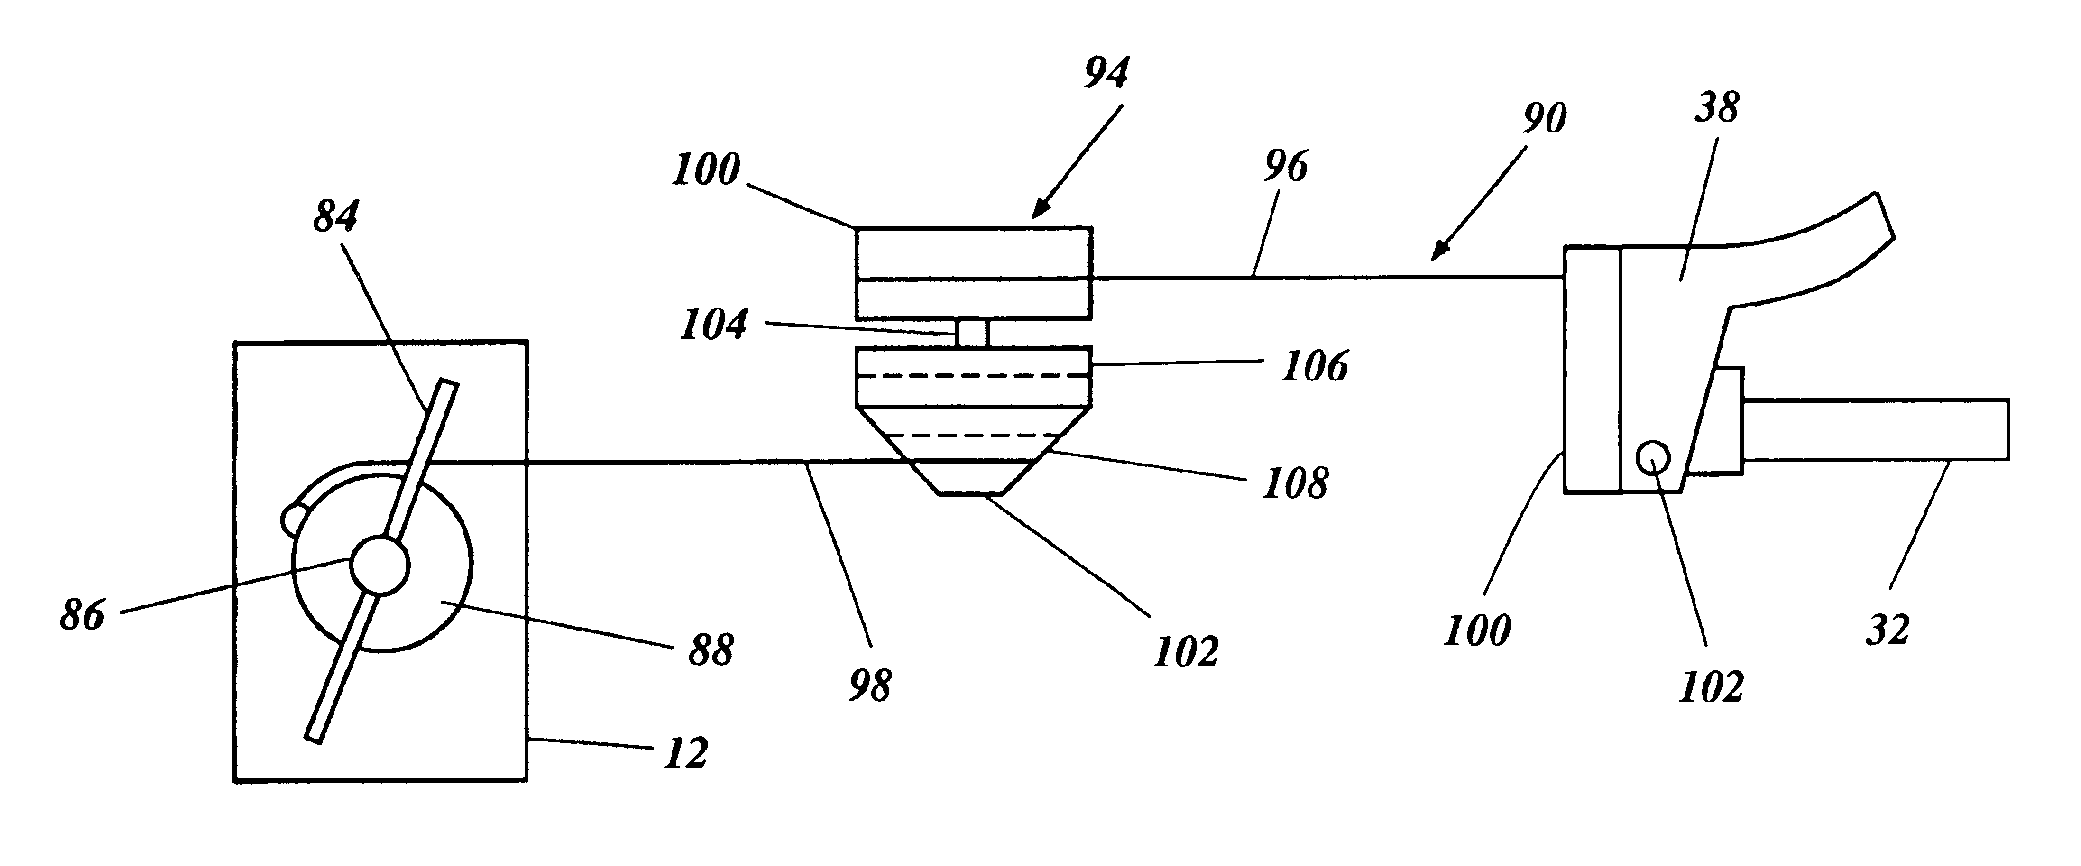 Engine control device for water vehicle